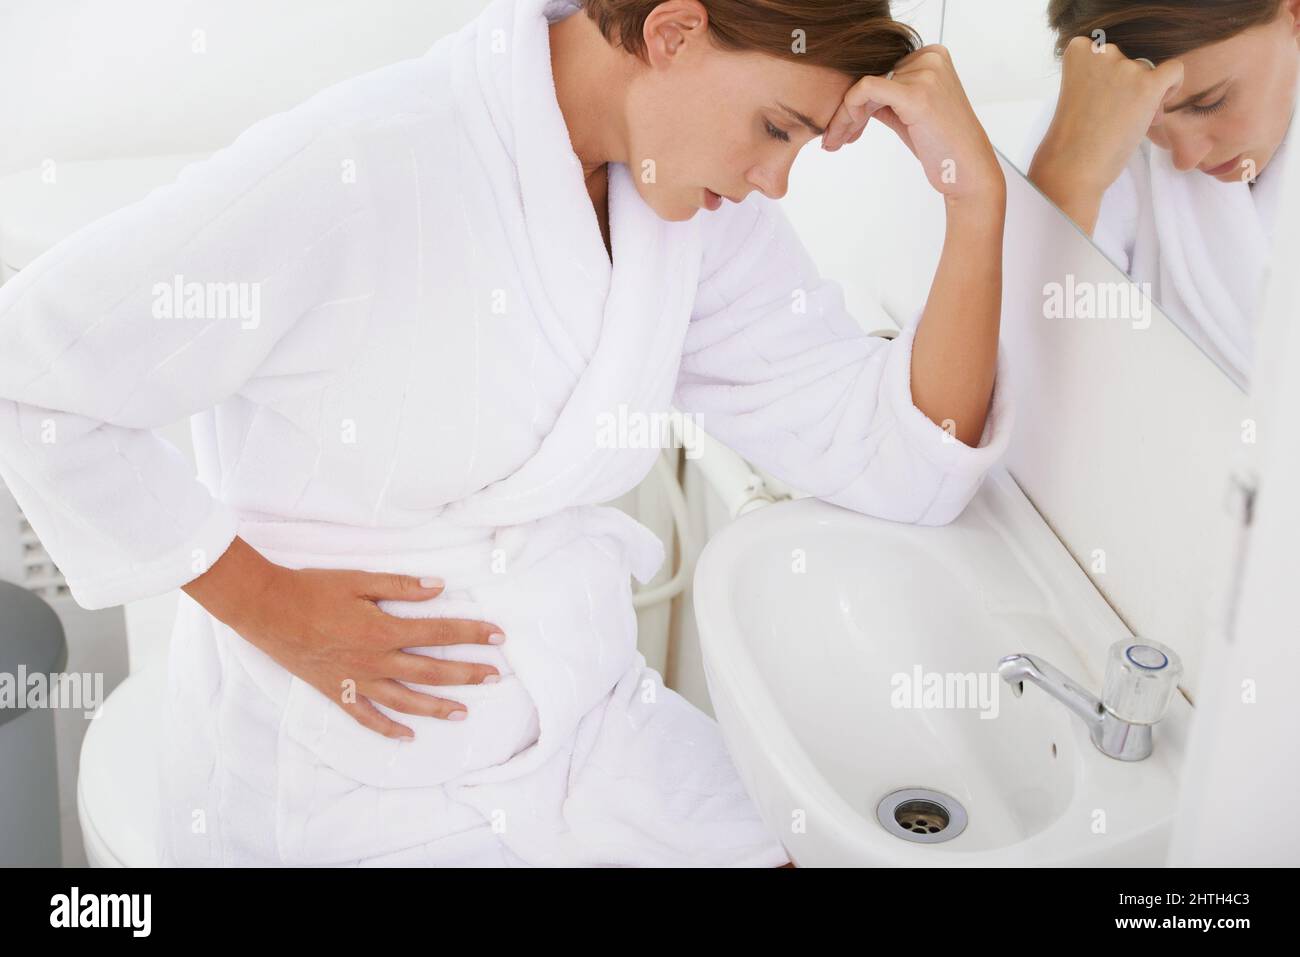 Struggling with morning sickness. A pregnant woman struggling with morning sickness in the bathroom. Stock Photo